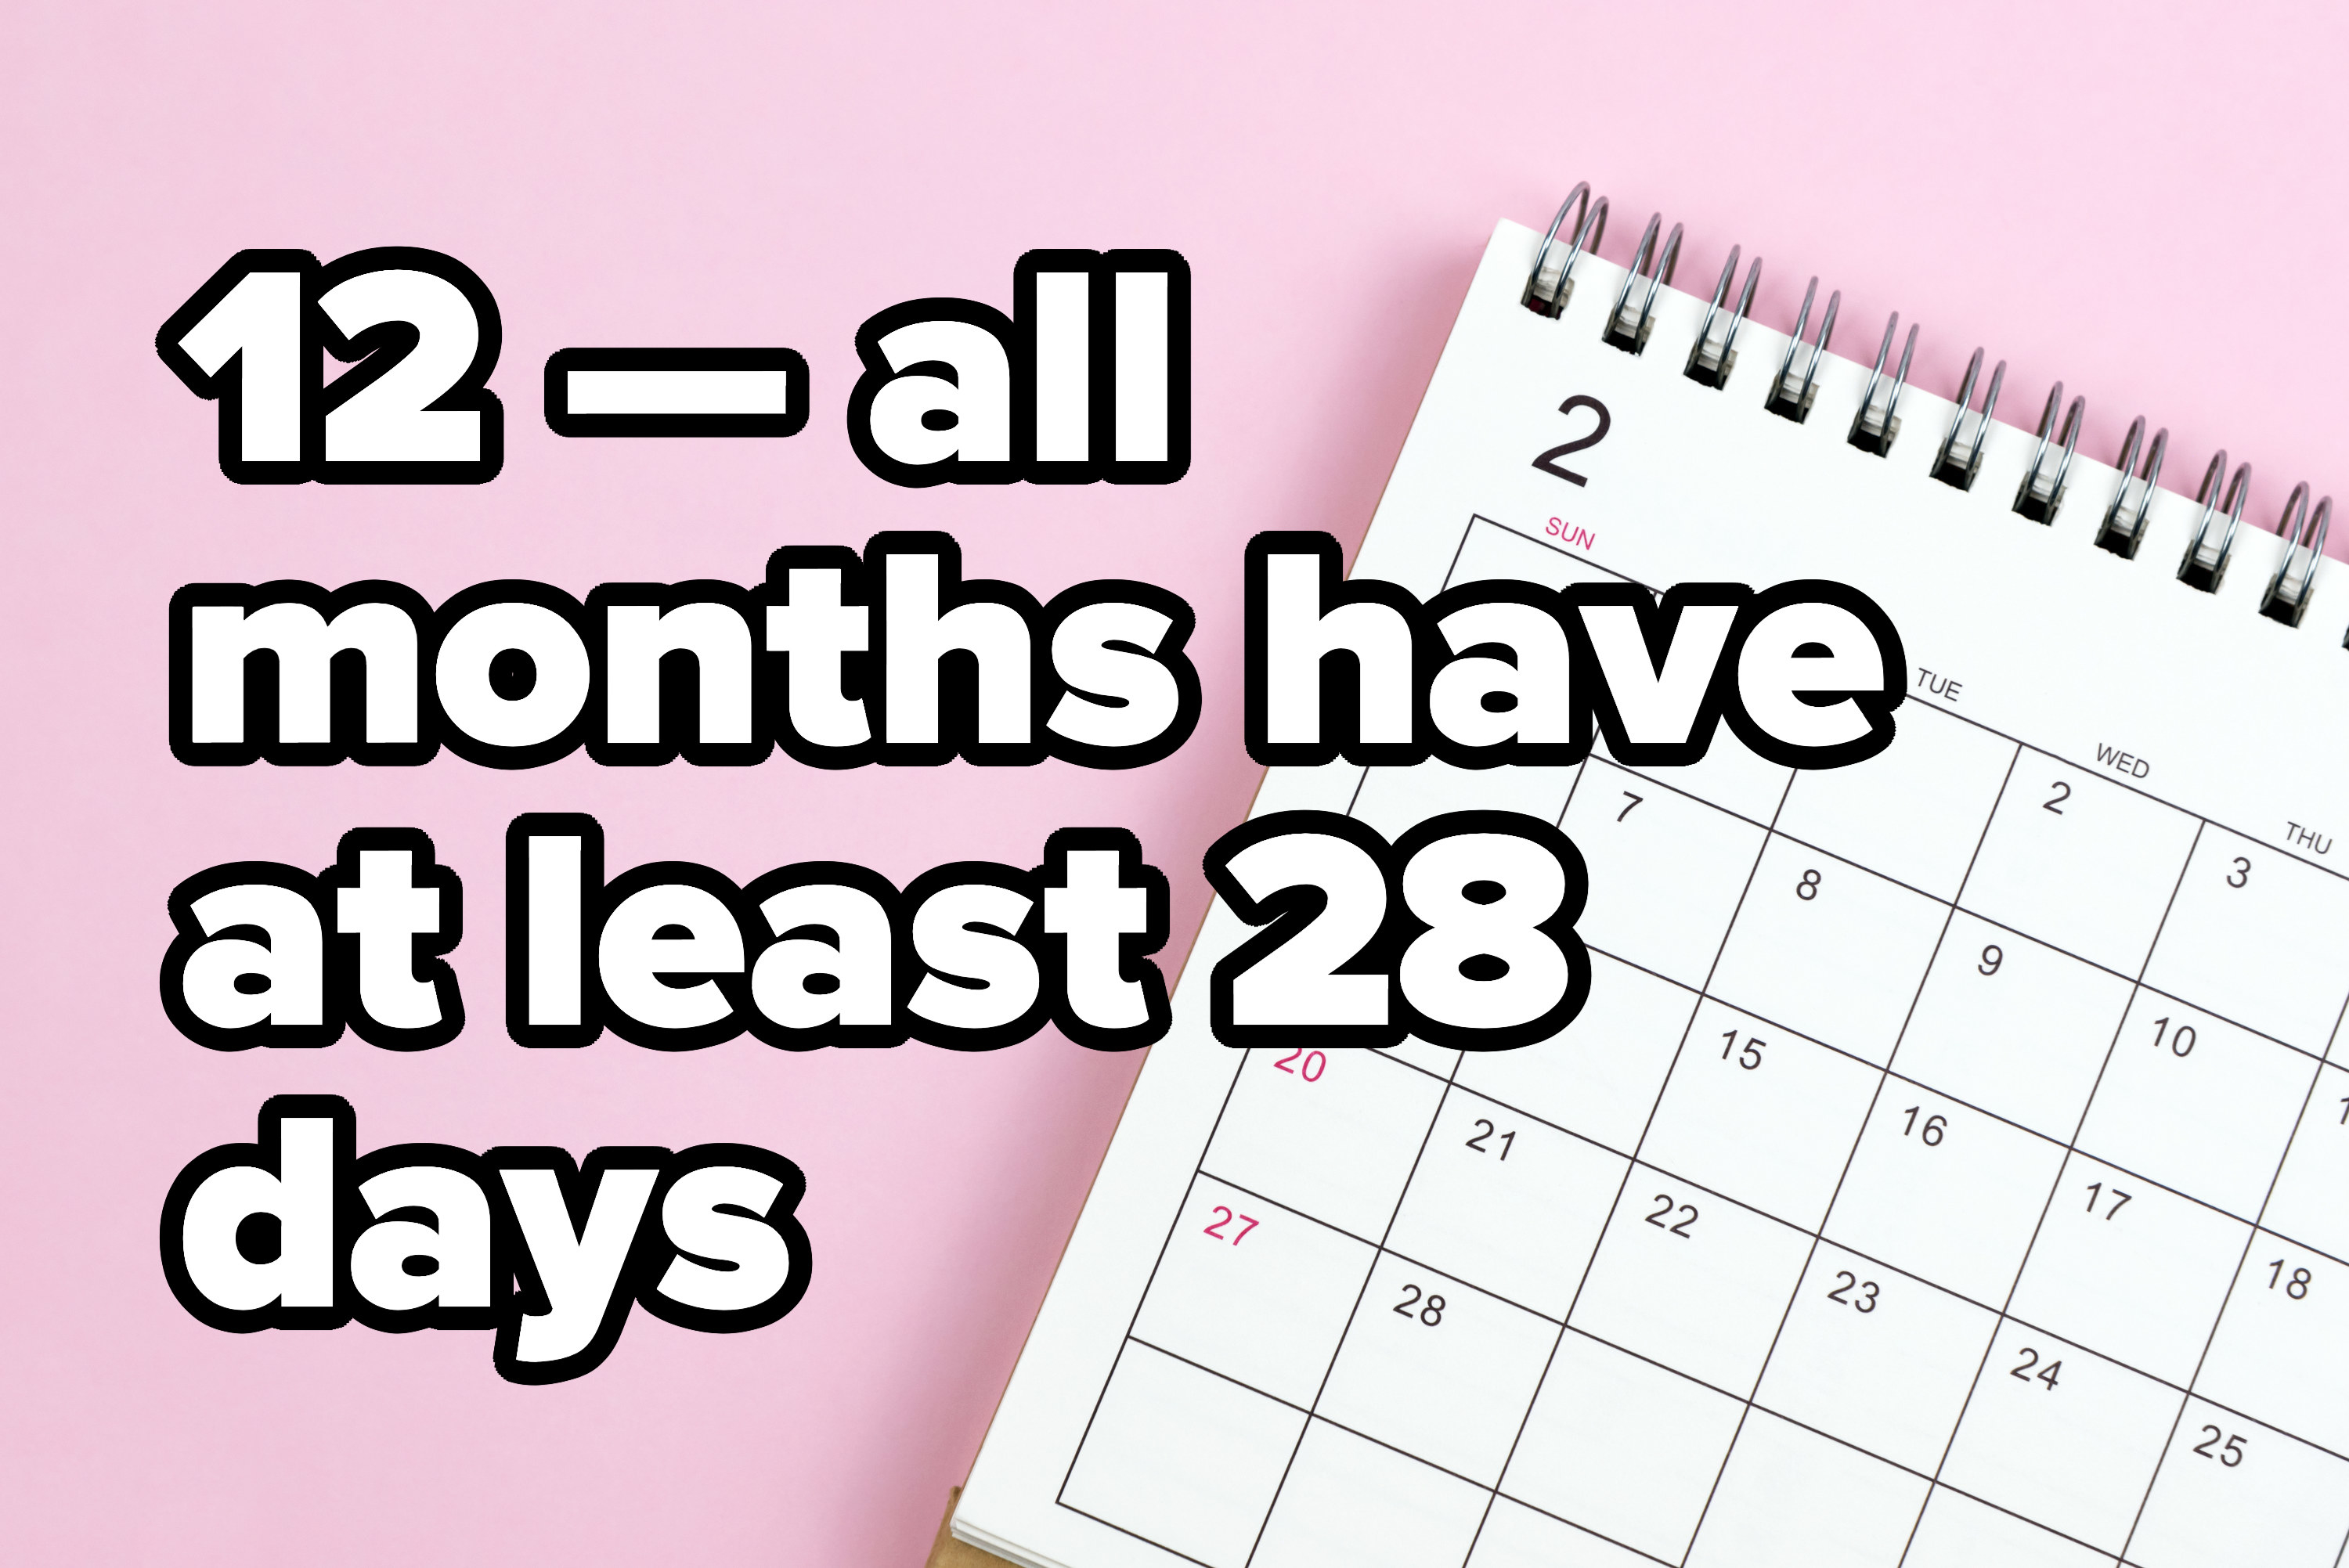 &quot;12 — all months have at least 28 days&quot;